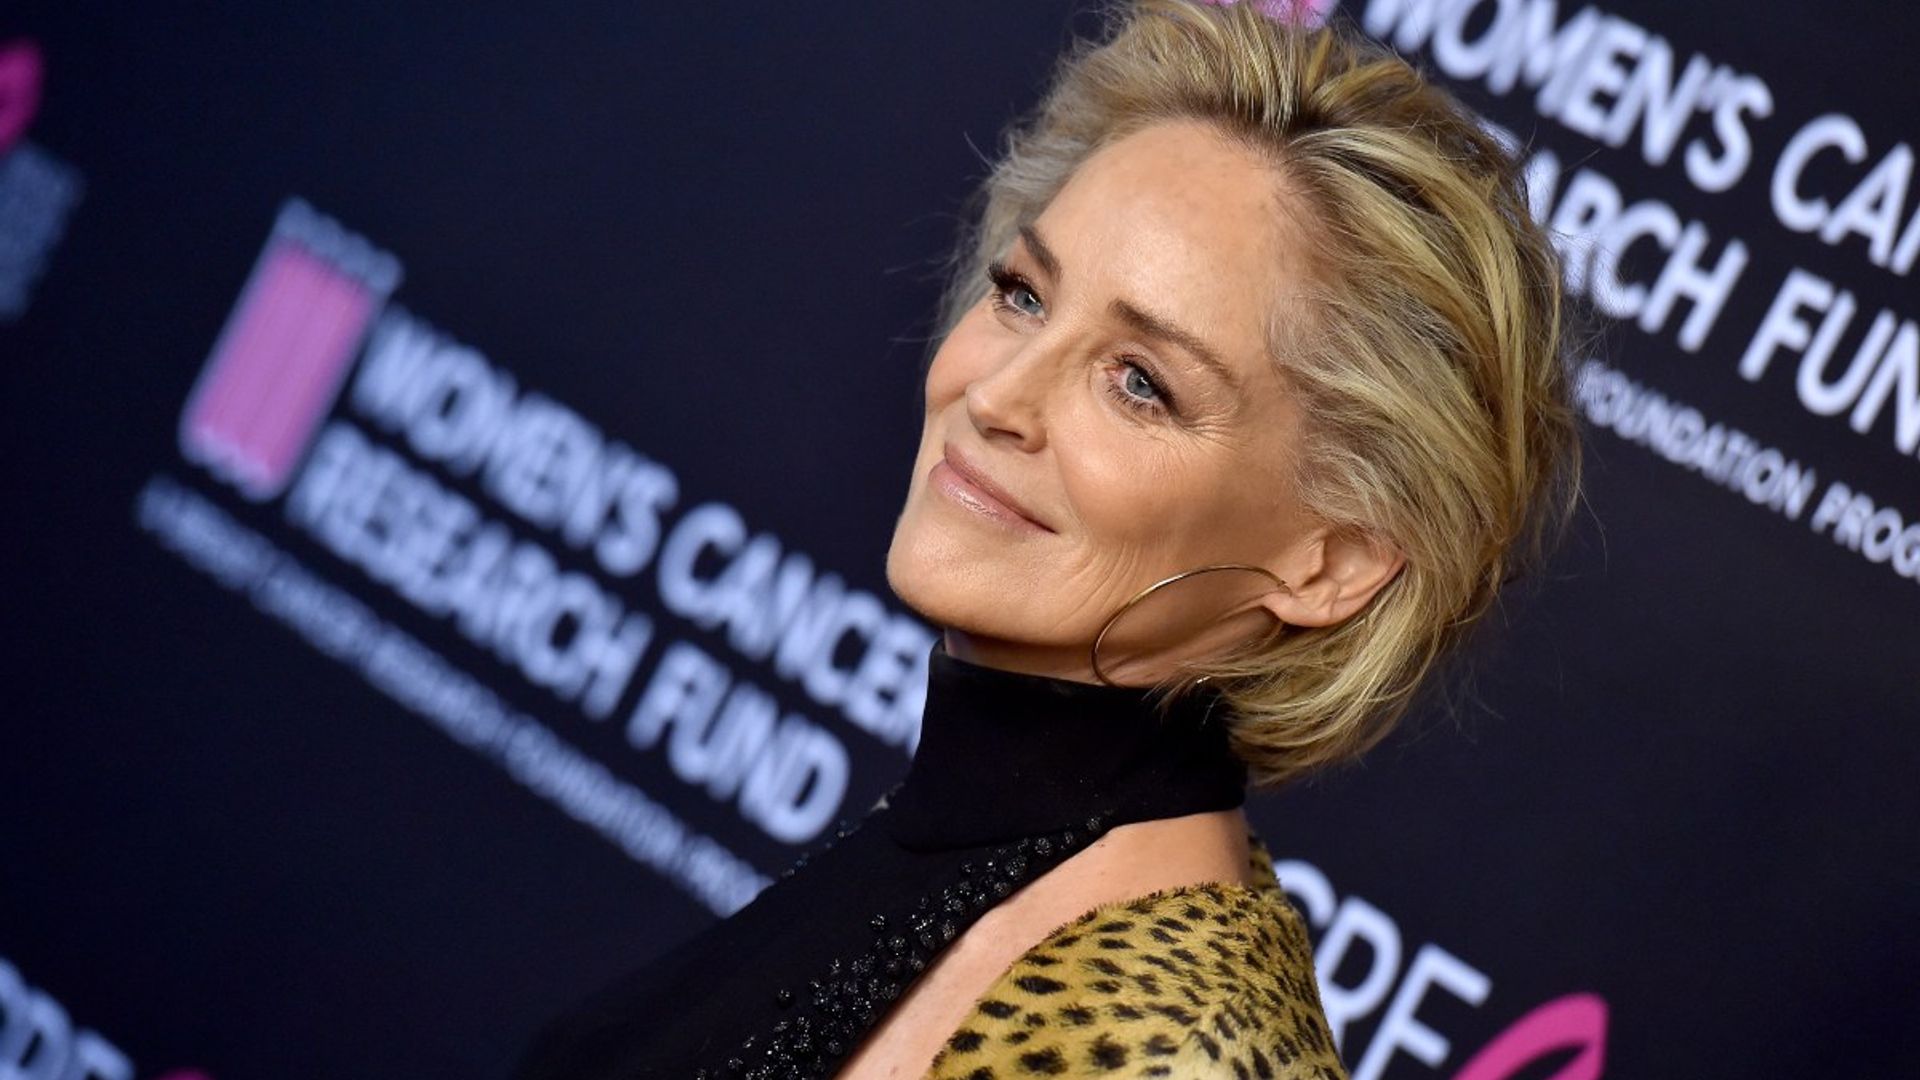 Sharon Stone shares heartbreaking news about baby nephew: 'We need a miracle'